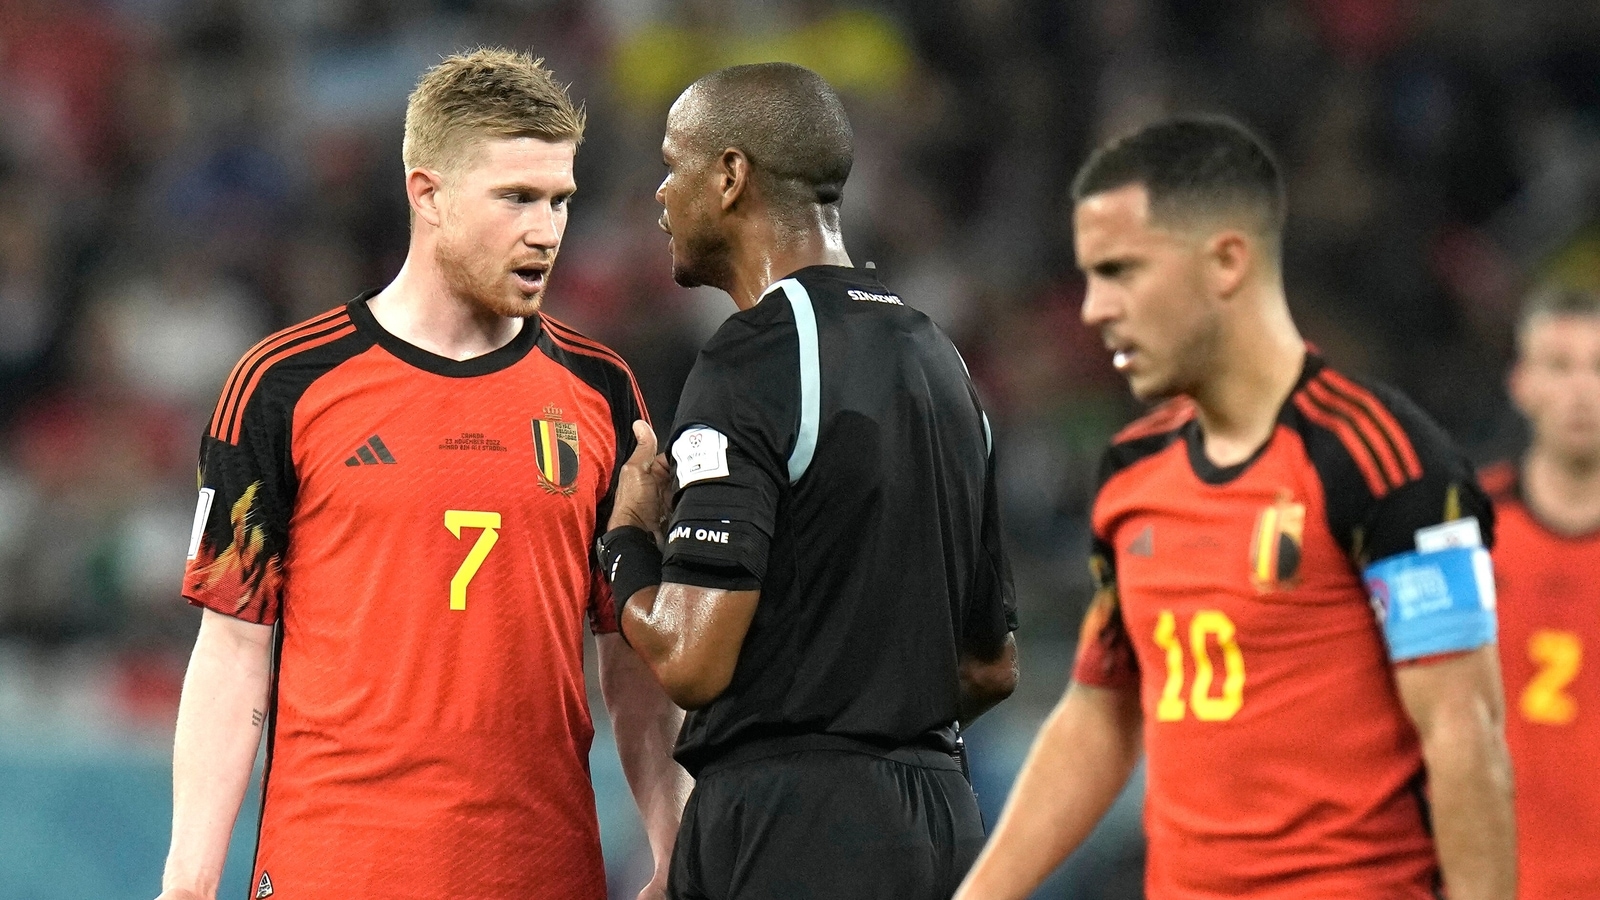 ‘If leaker gets out, it’s his last day in national team’: Courtois tears into reports of fight between Hazard, de Bruyne